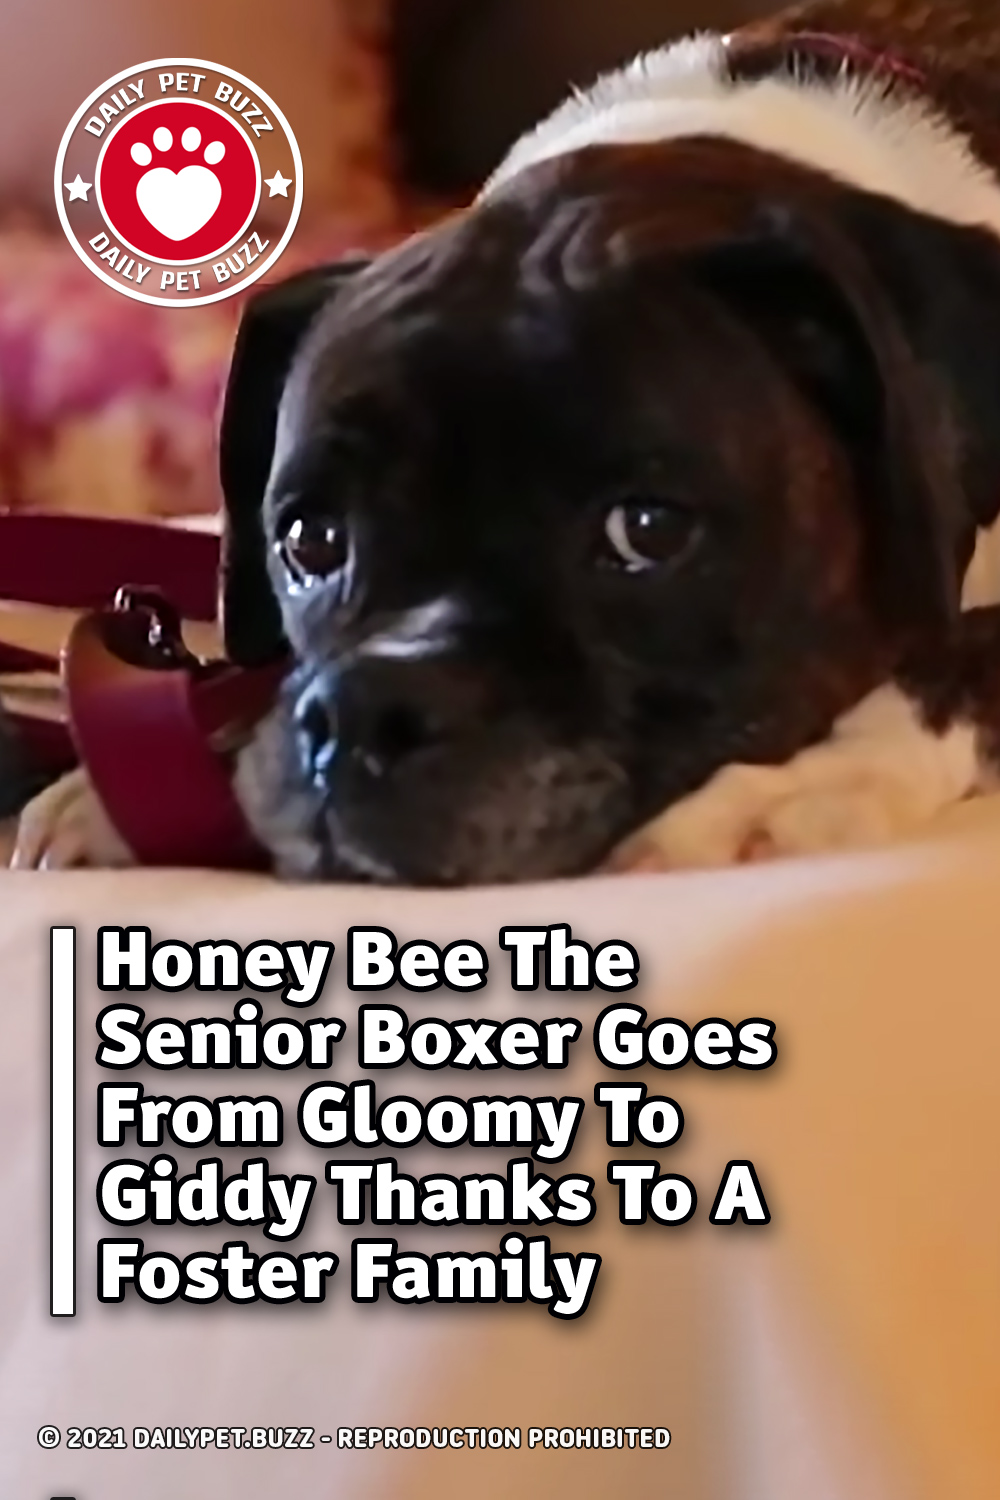 Honey Bee The Senior Boxer Goes From Gloomy To Giddy Thanks To A Foster Family